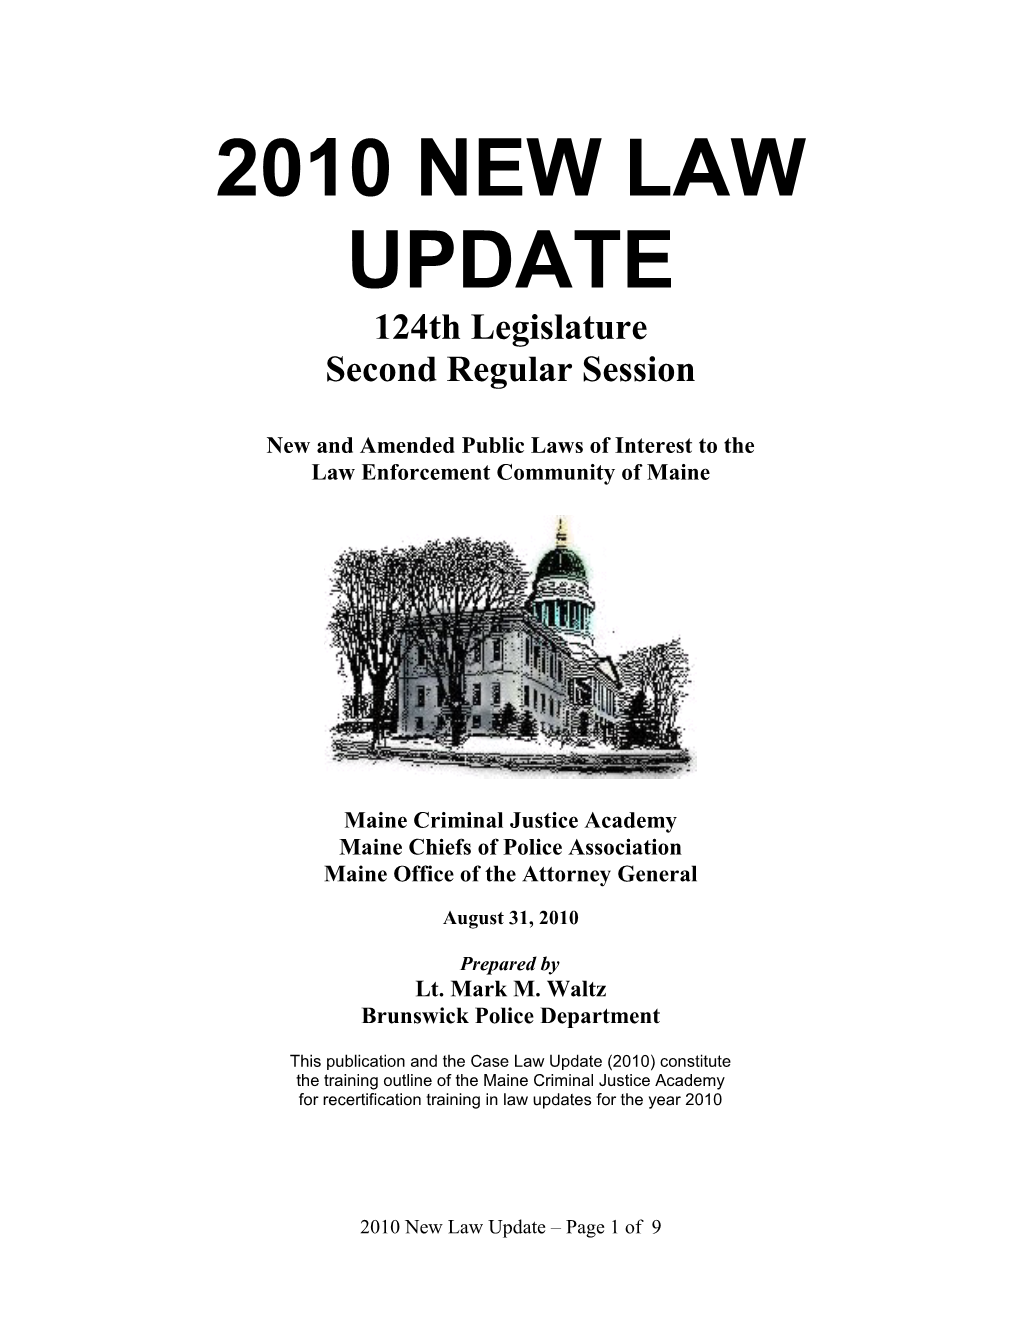 New and Amended Public Laws of Interest to The